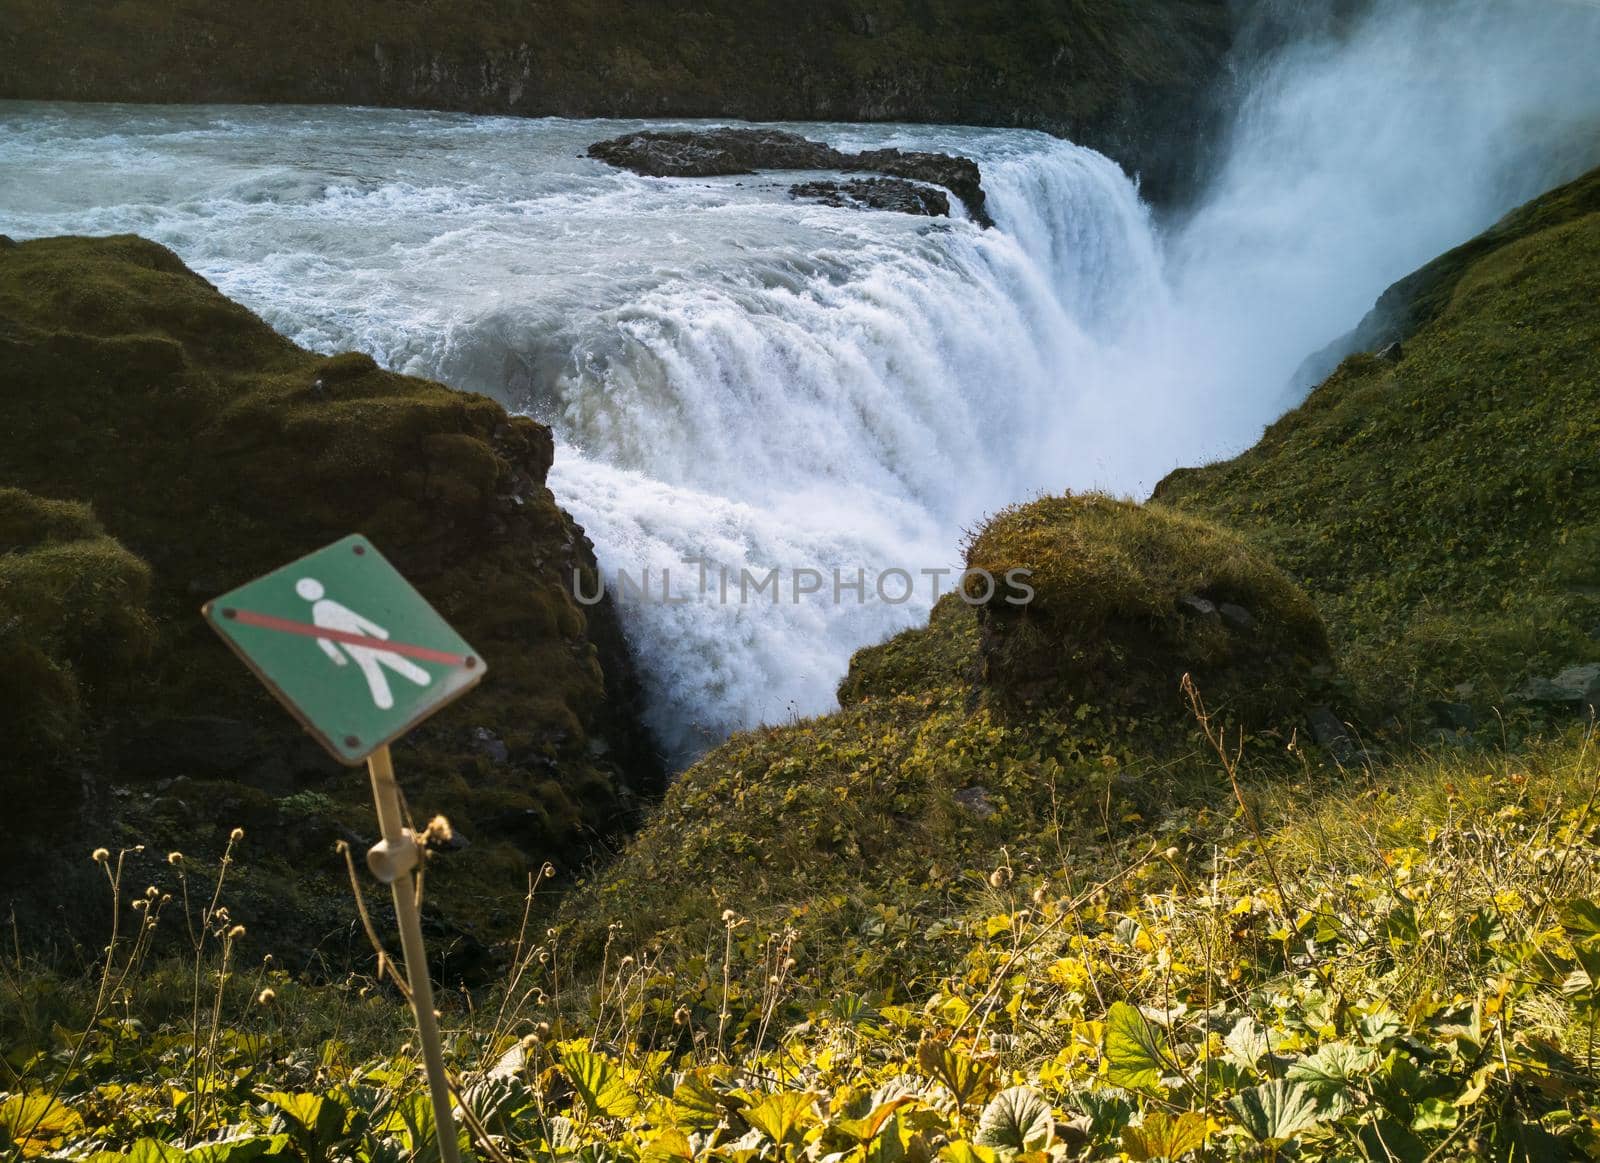 Gullfoss massive waterfall and hiking forbidden sign in Iceland